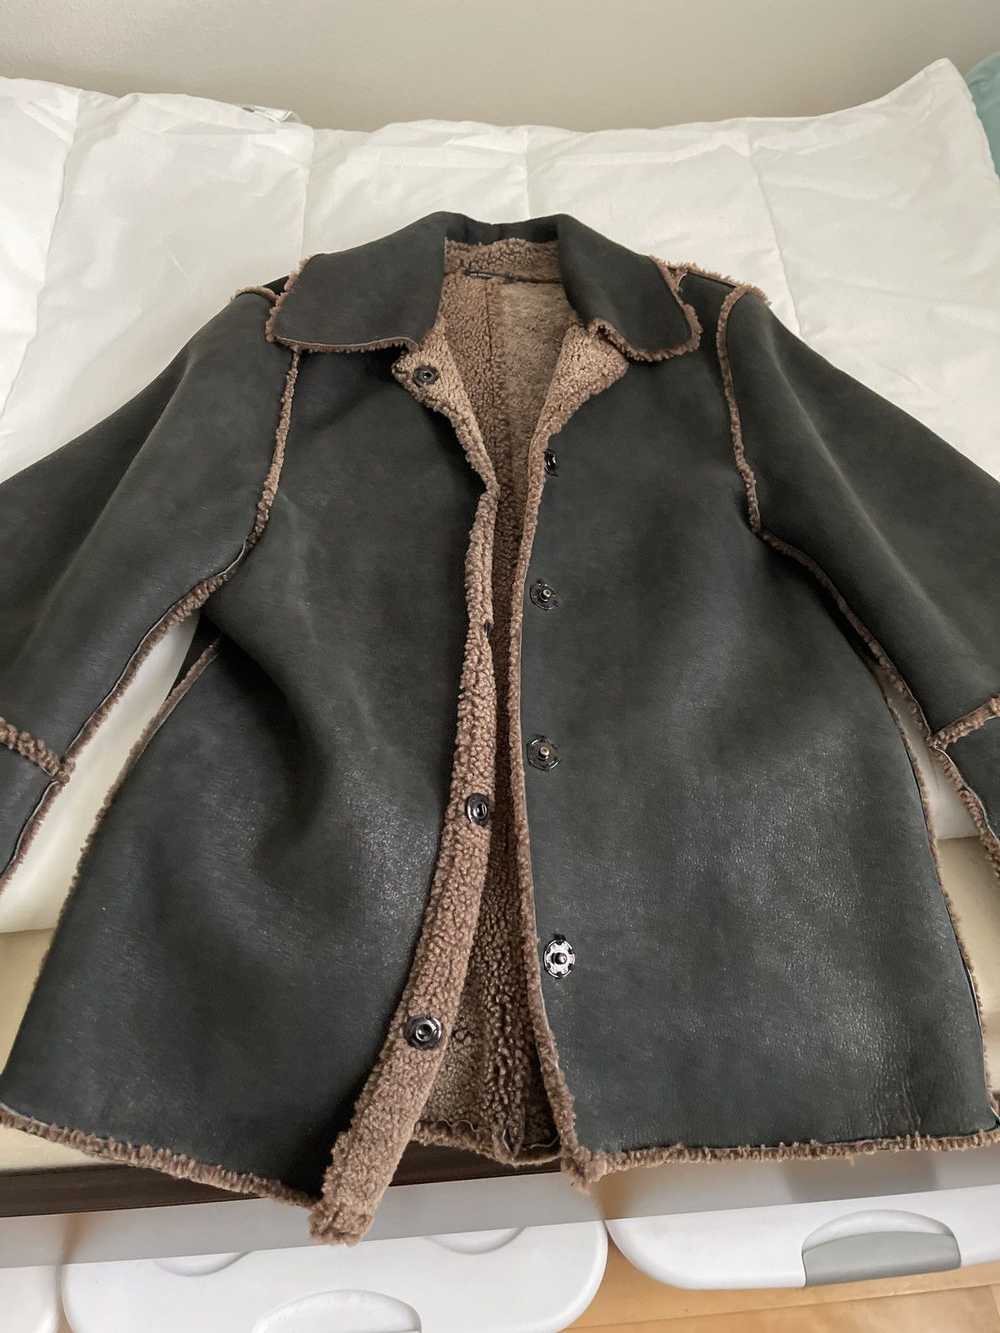 Ann Demeulemeester AW99 Shearling Jacket - image 9